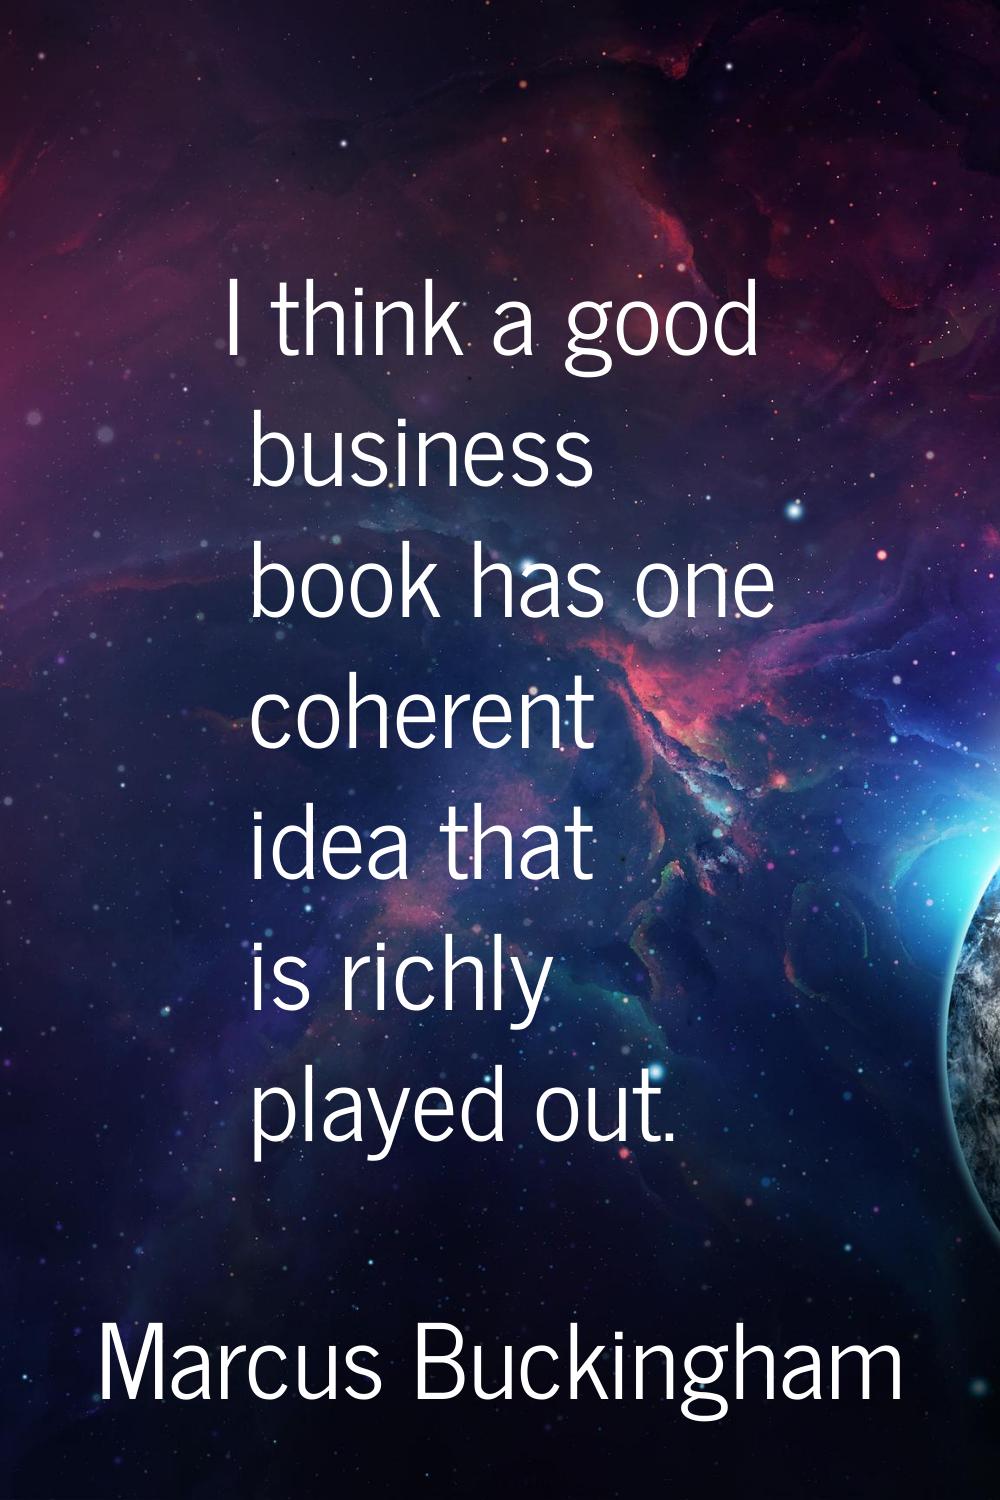 I think a good business book has one coherent idea that is richly played out.